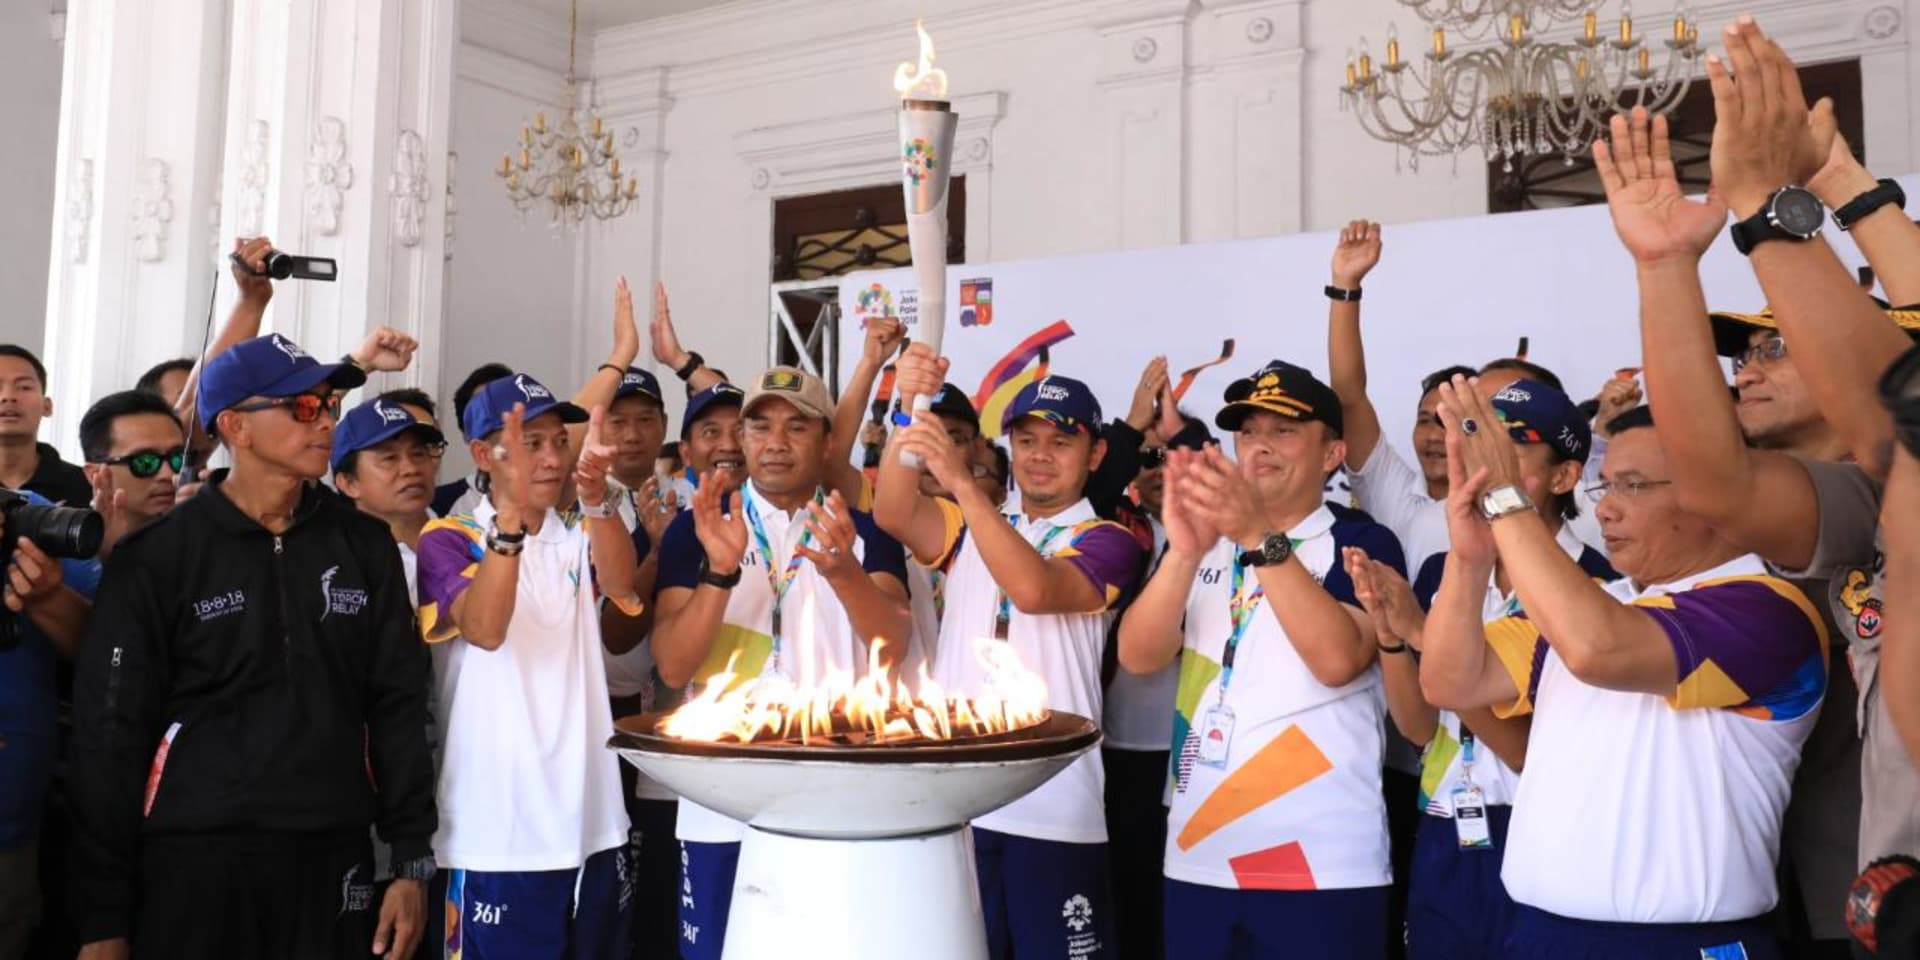 The 2018 Asian Games Torch will complete its Relay when it arrives in Jakarta today ©Asian Games 2018